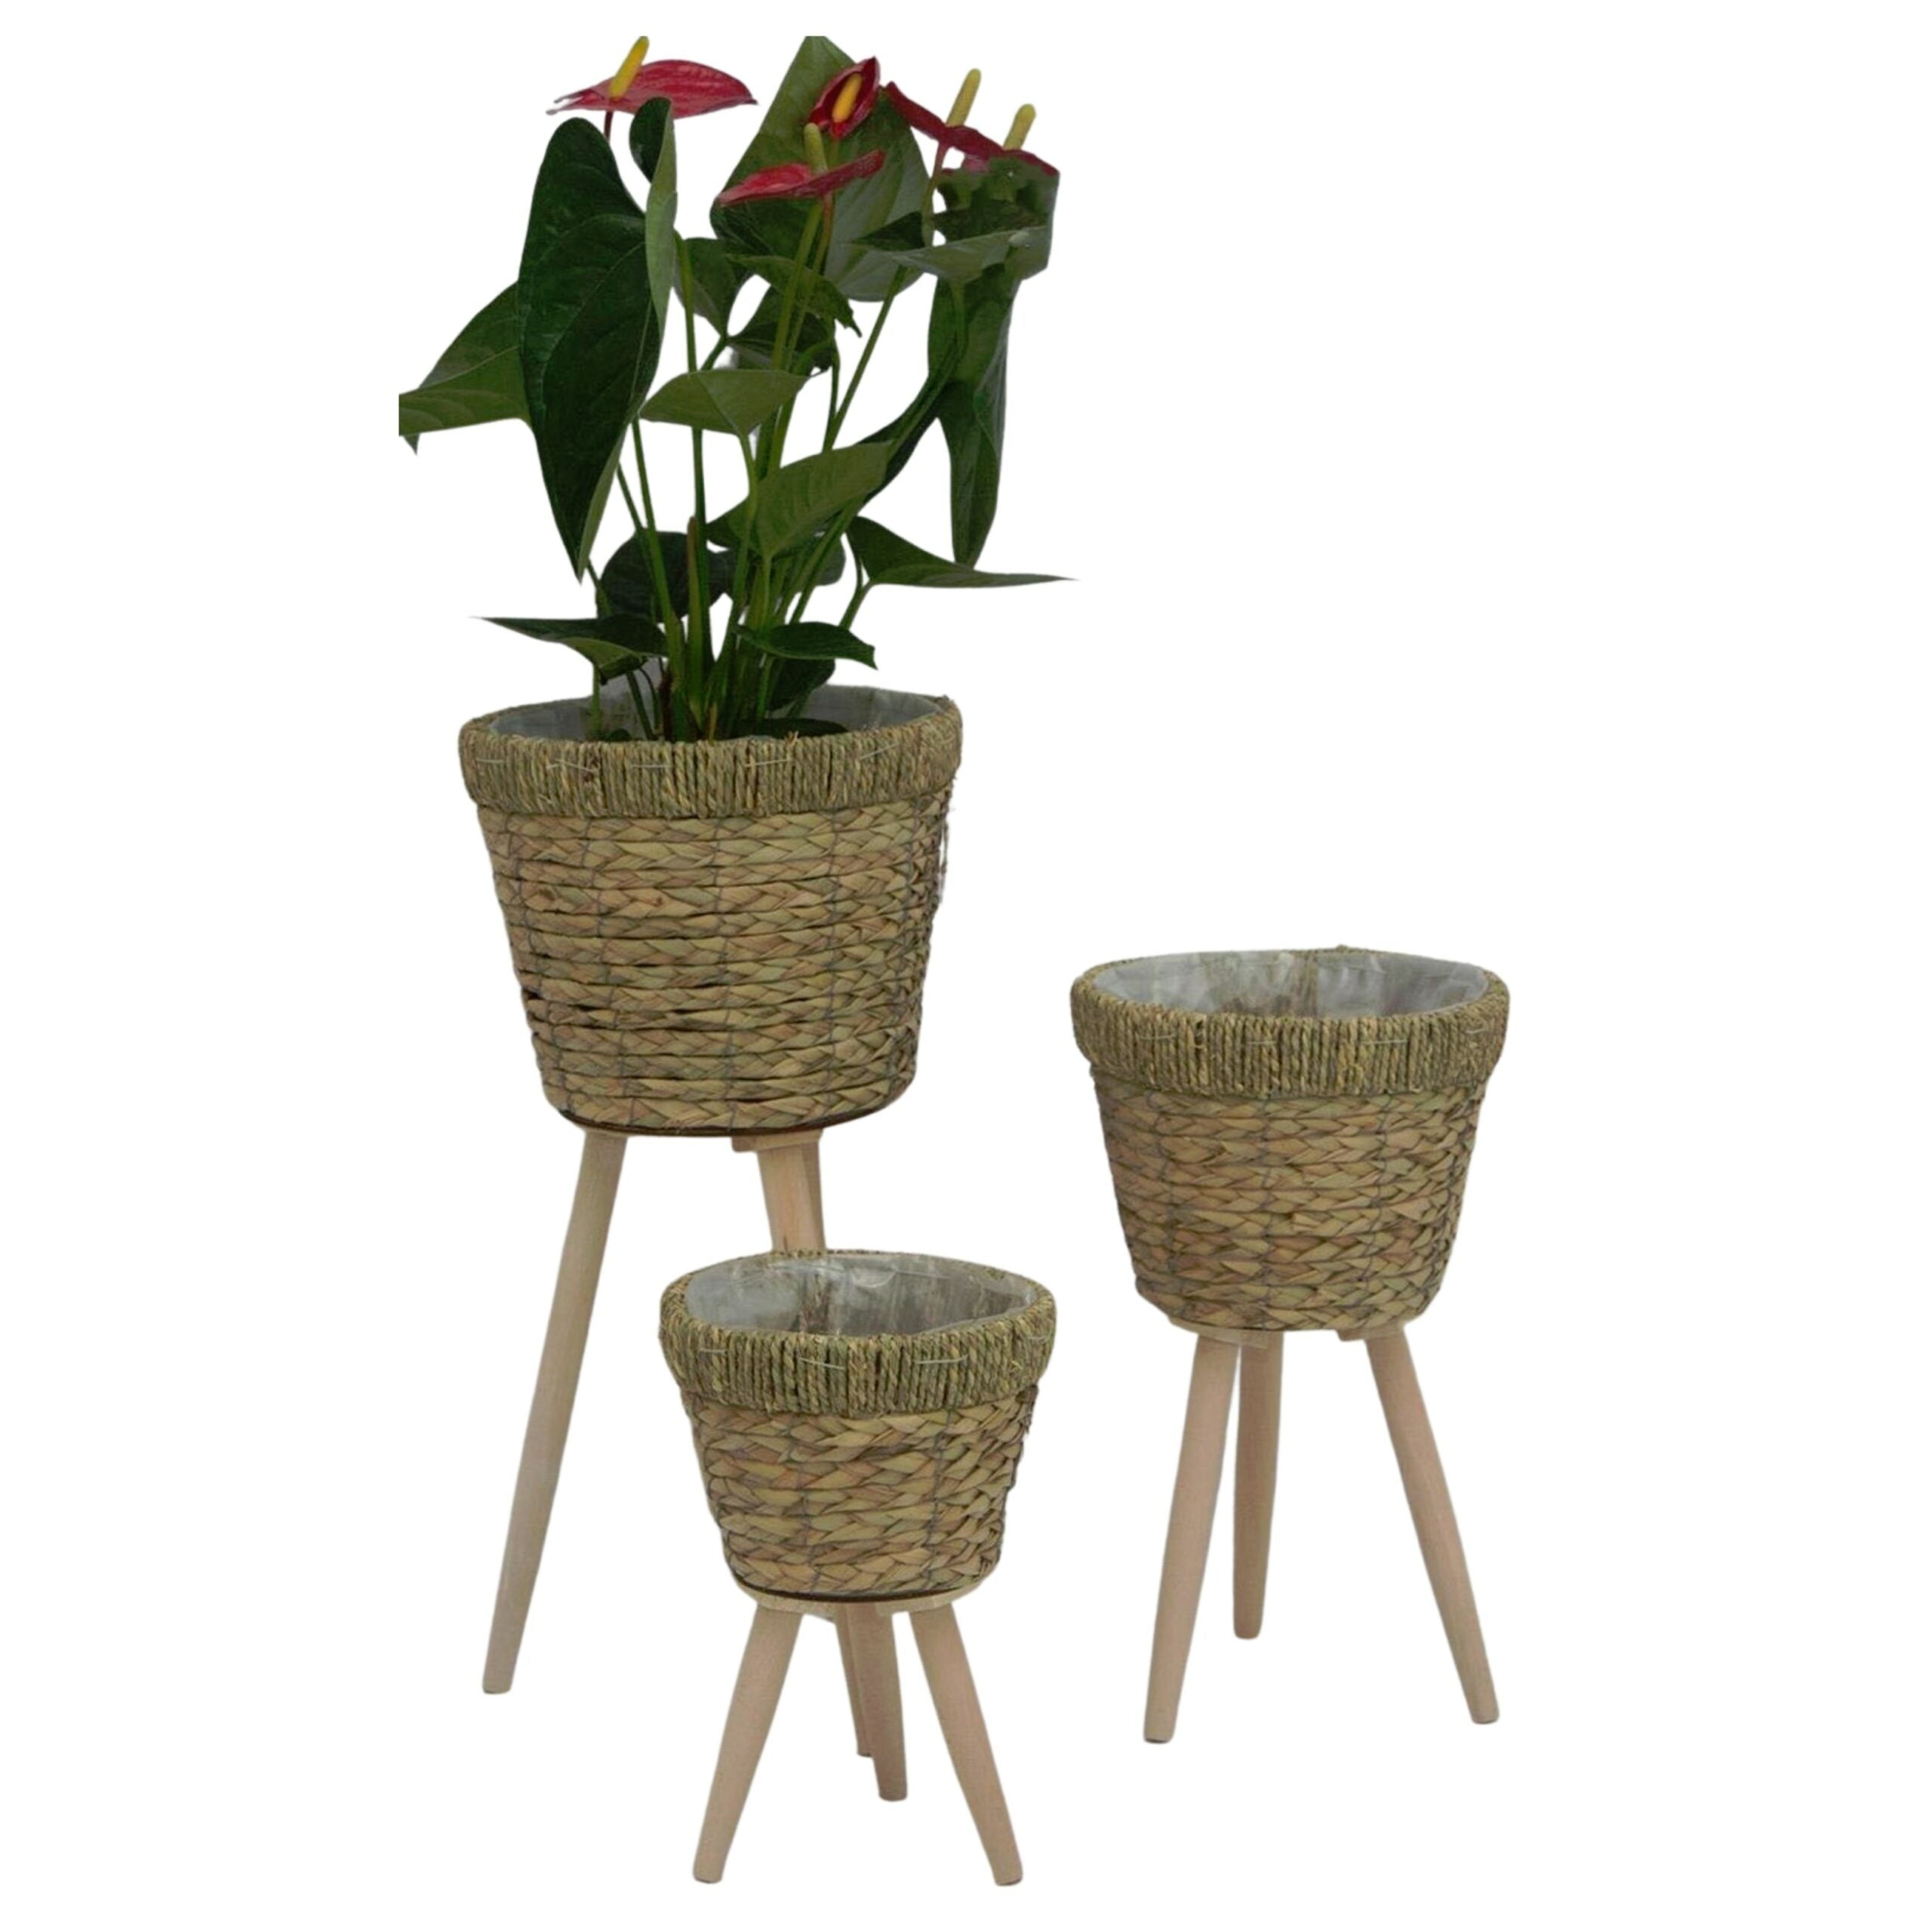 Woven Planters on Legs - Natural Tone (Set of 3)